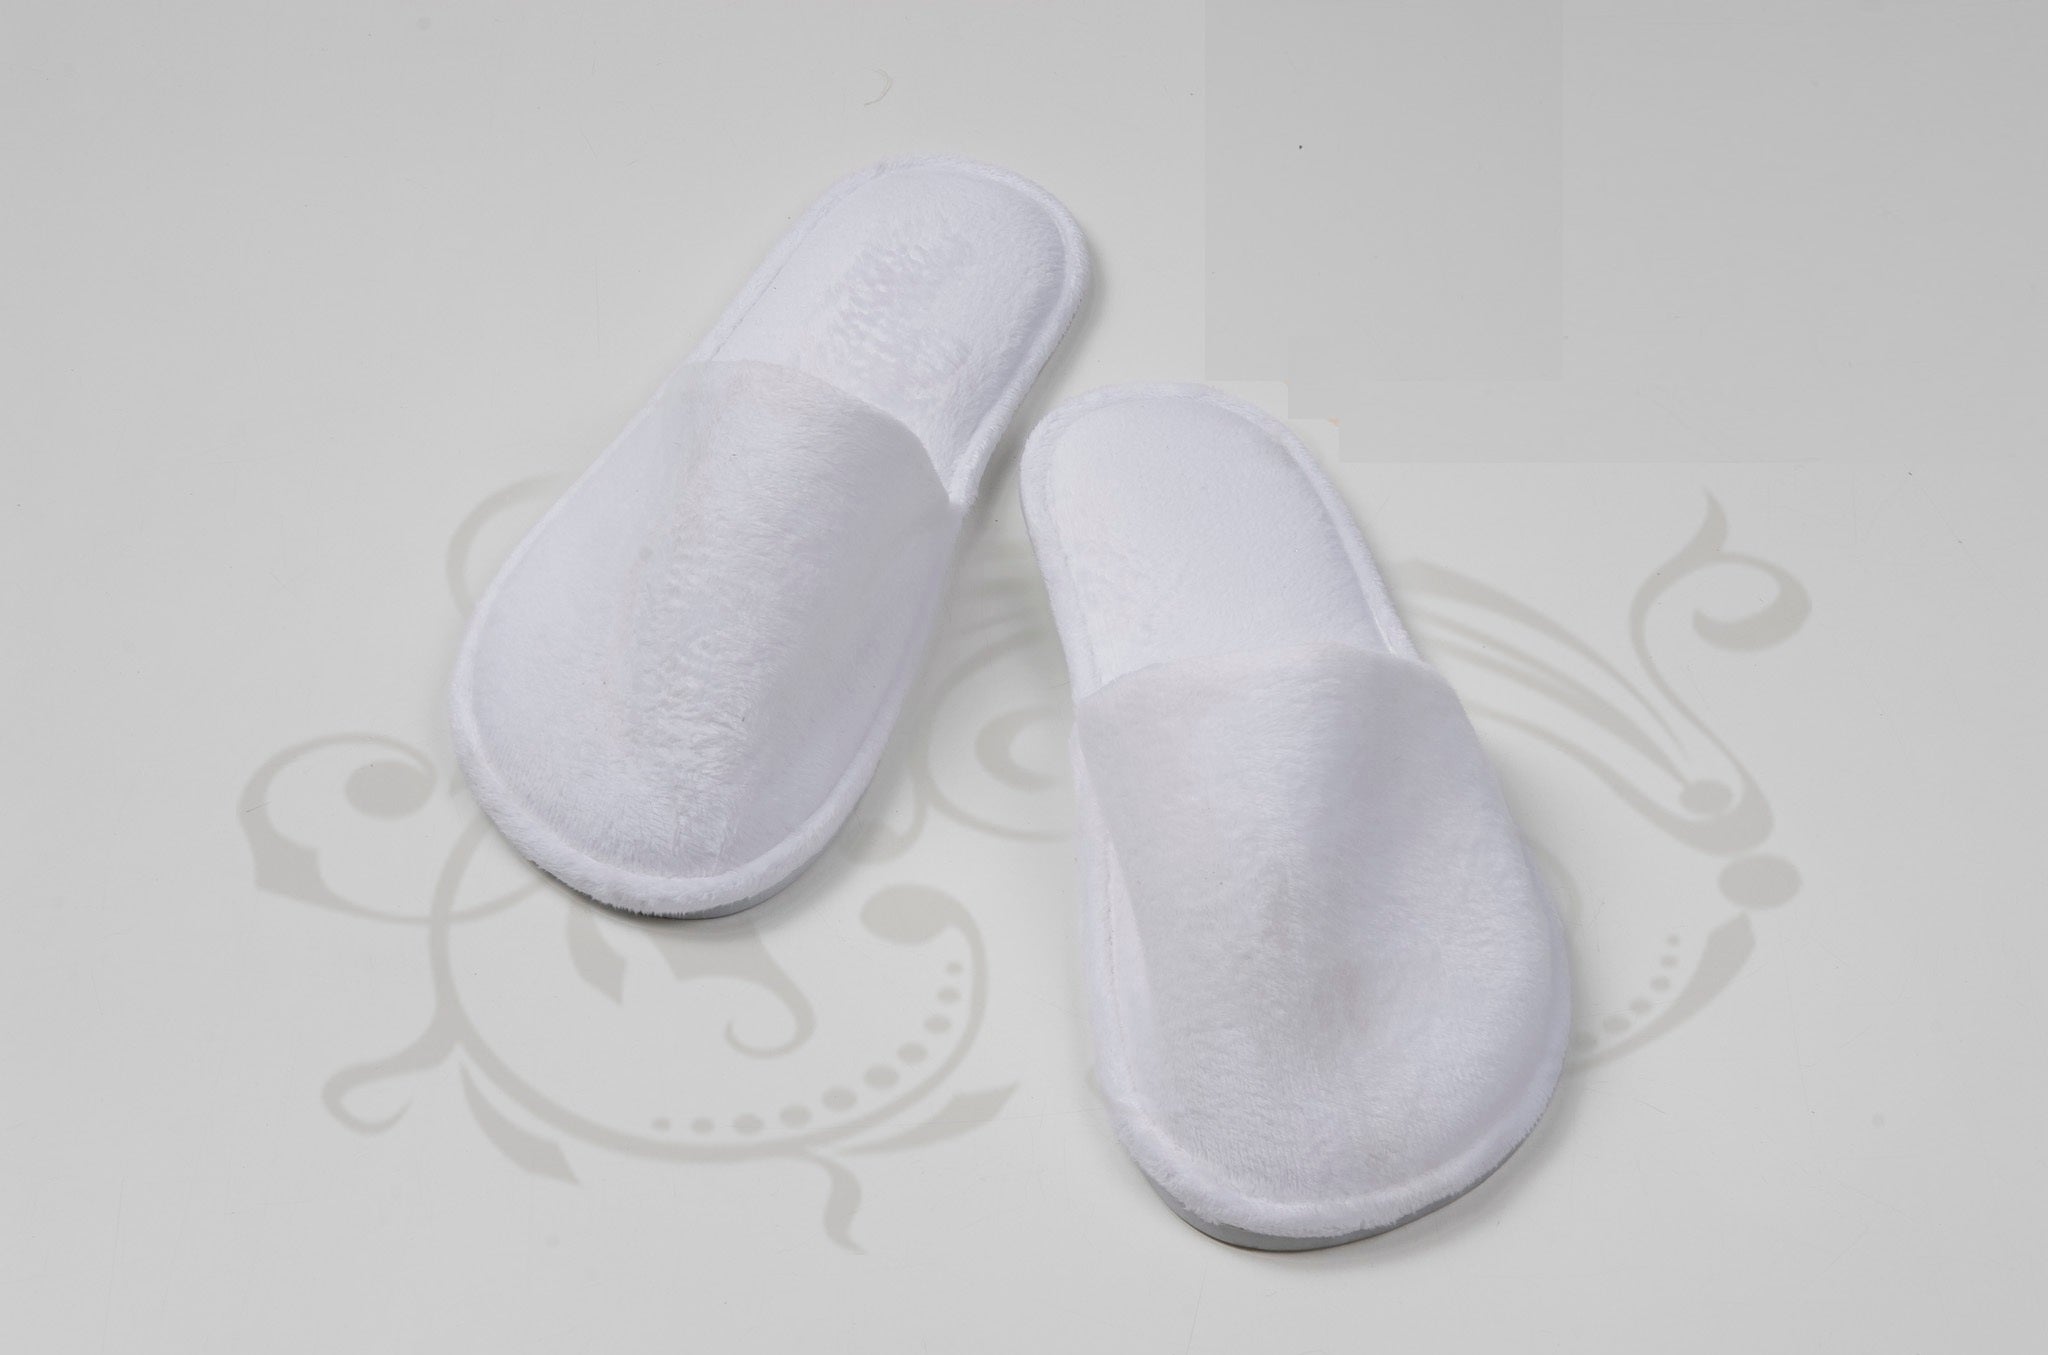 Custom Branded Hotel Slippers with FREE Design, Enquire Now!